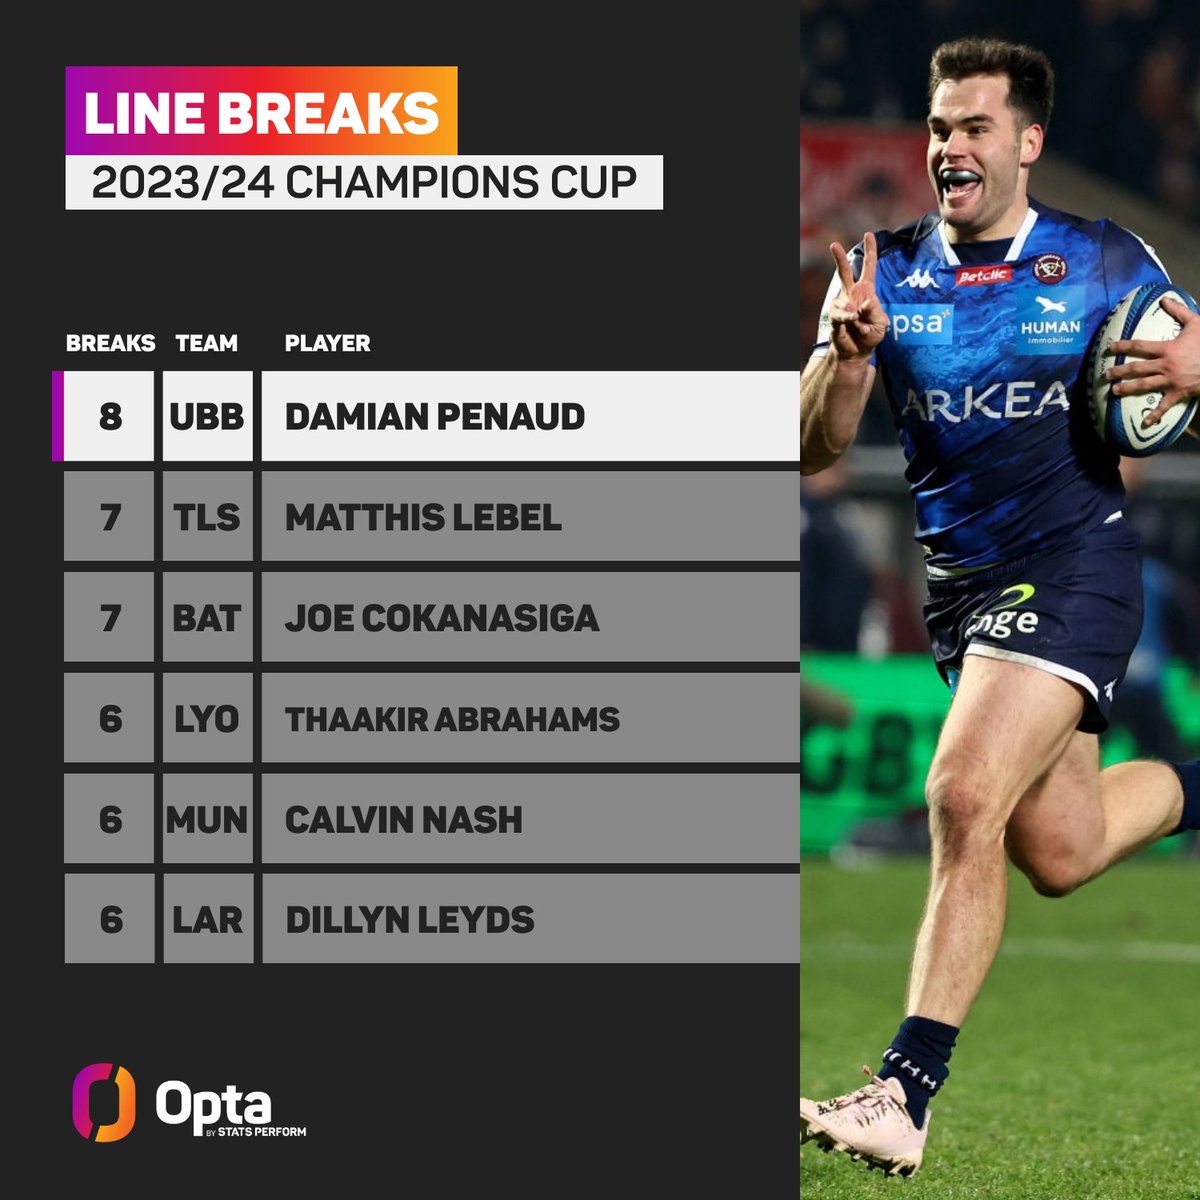 8 - @UBBrugby’s Damian Penaud has made more line breaks than any other player in this season’s @ChampionsCup (8) and is also one of just two players to have evaded at least 80% of the tackles they’ve faced in the competition this term (84%, also Marcus Smith). Threat.